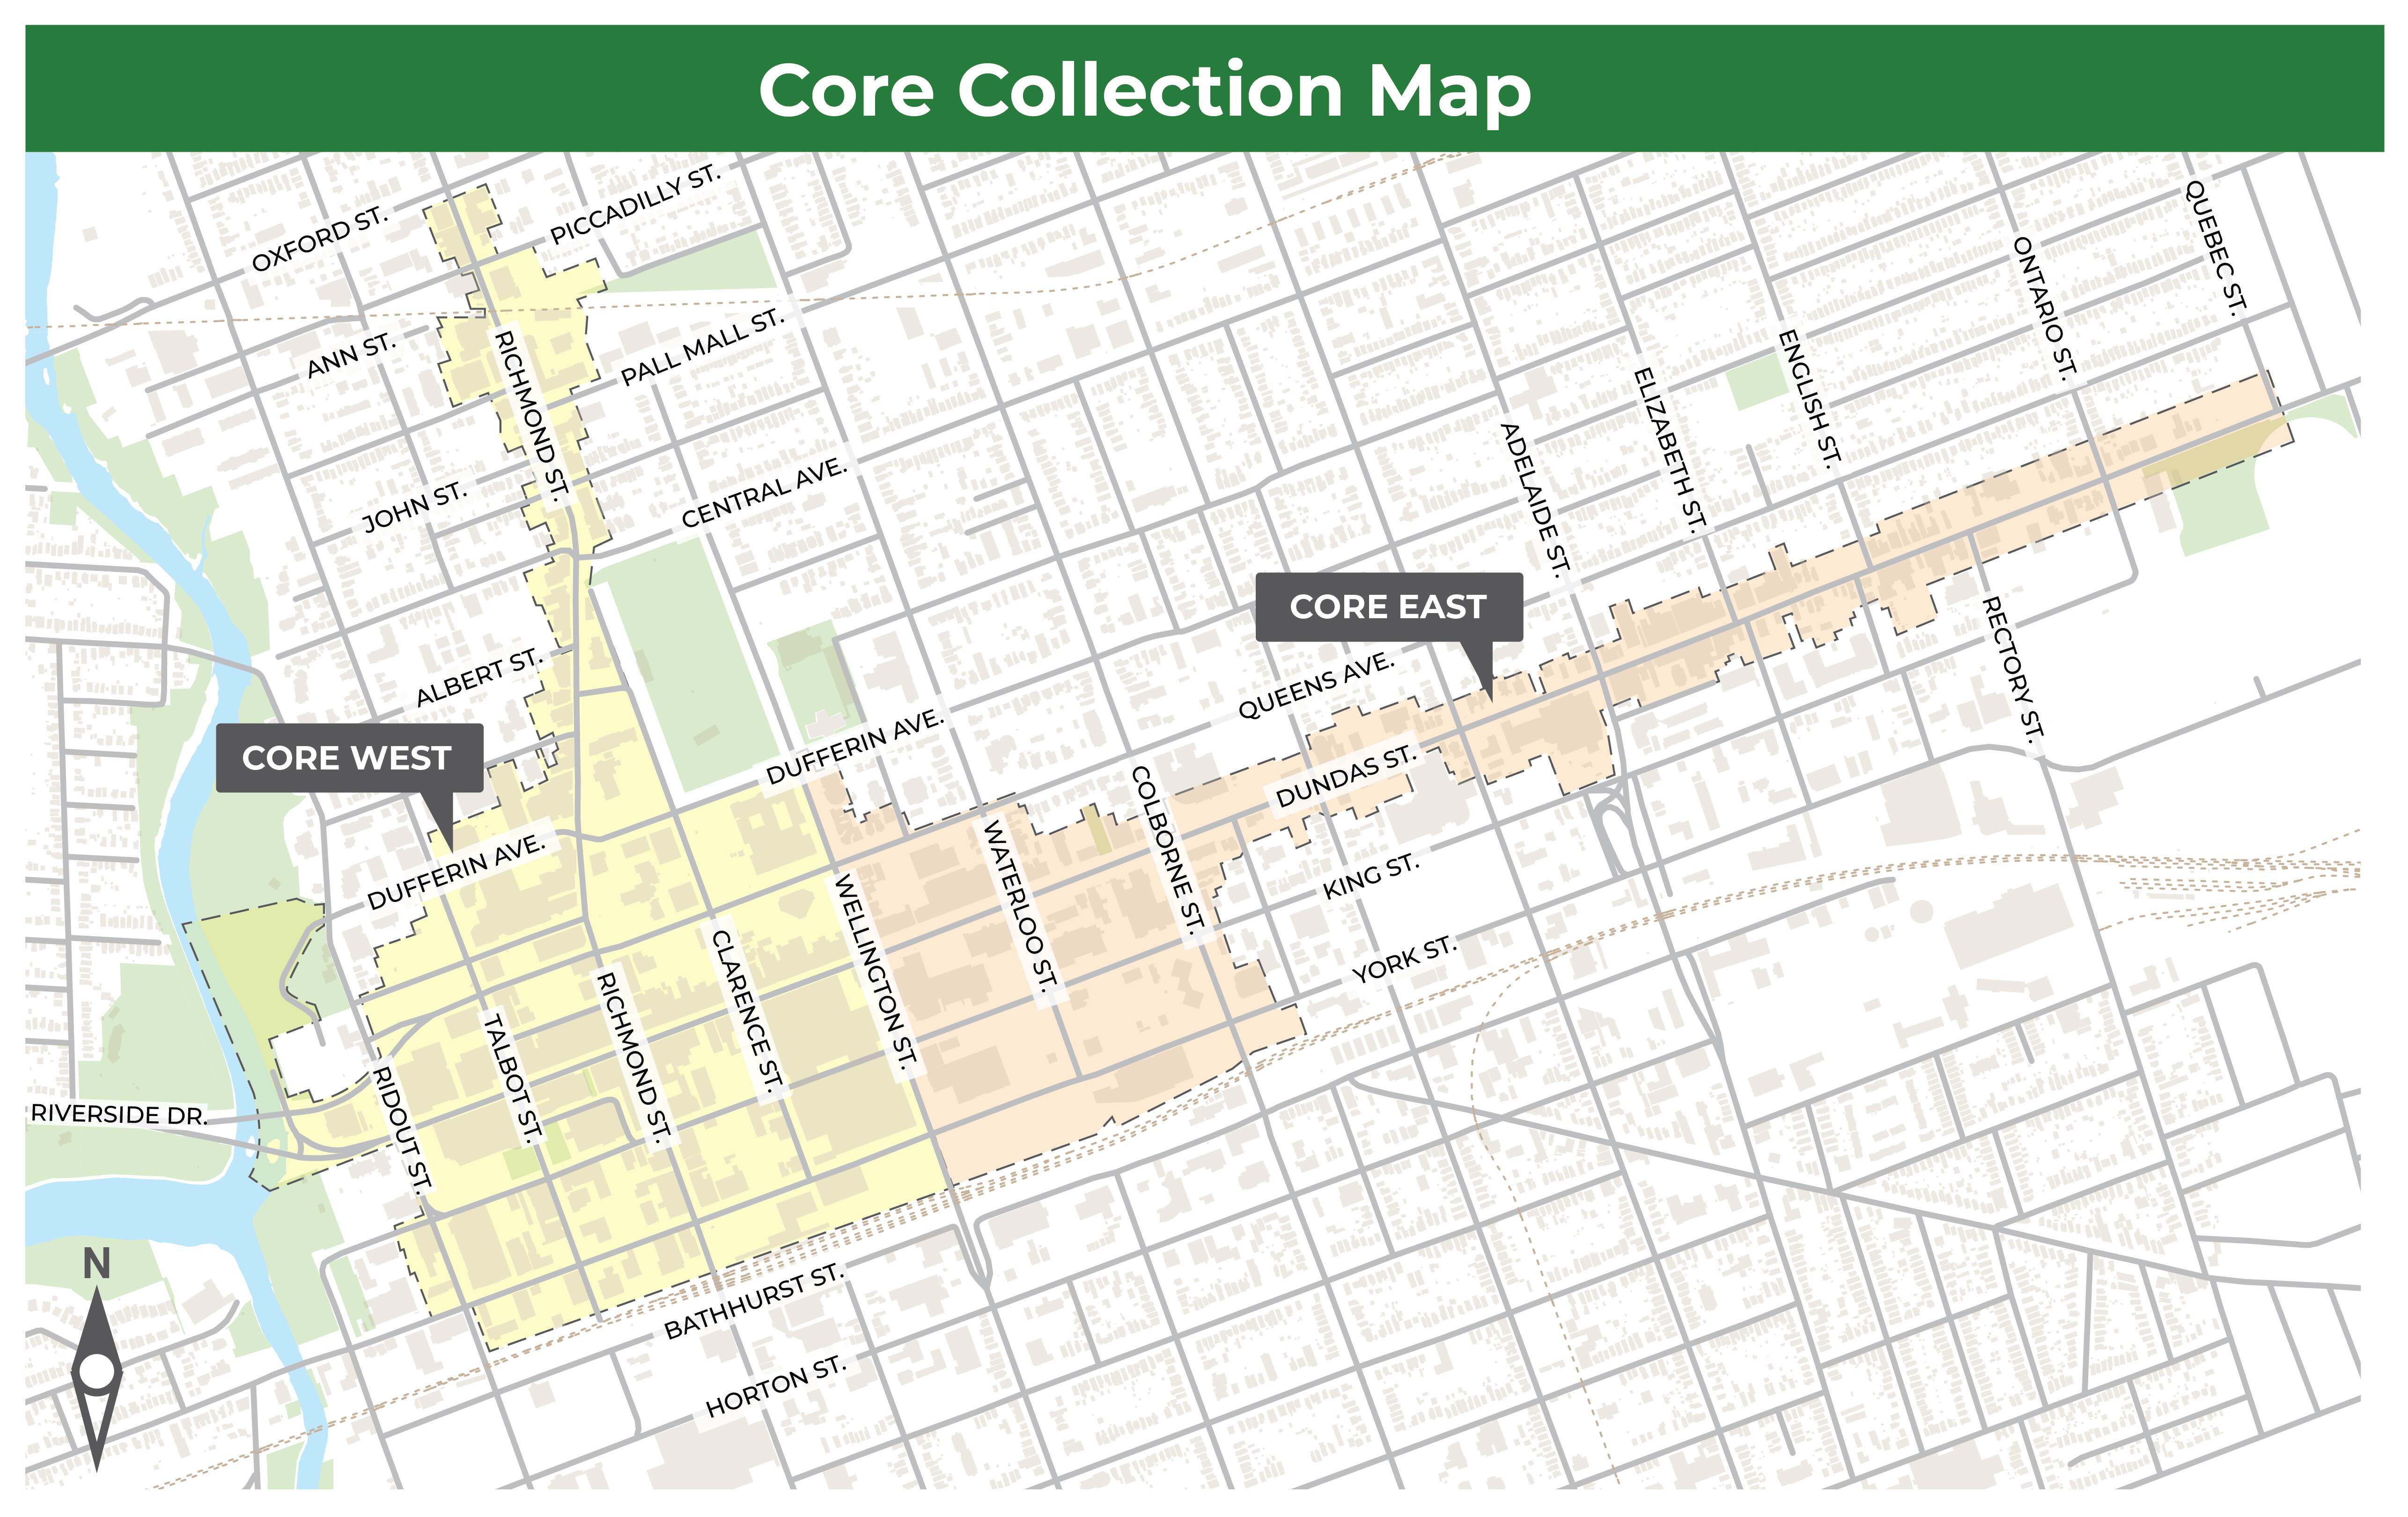 Area view of the core collection map